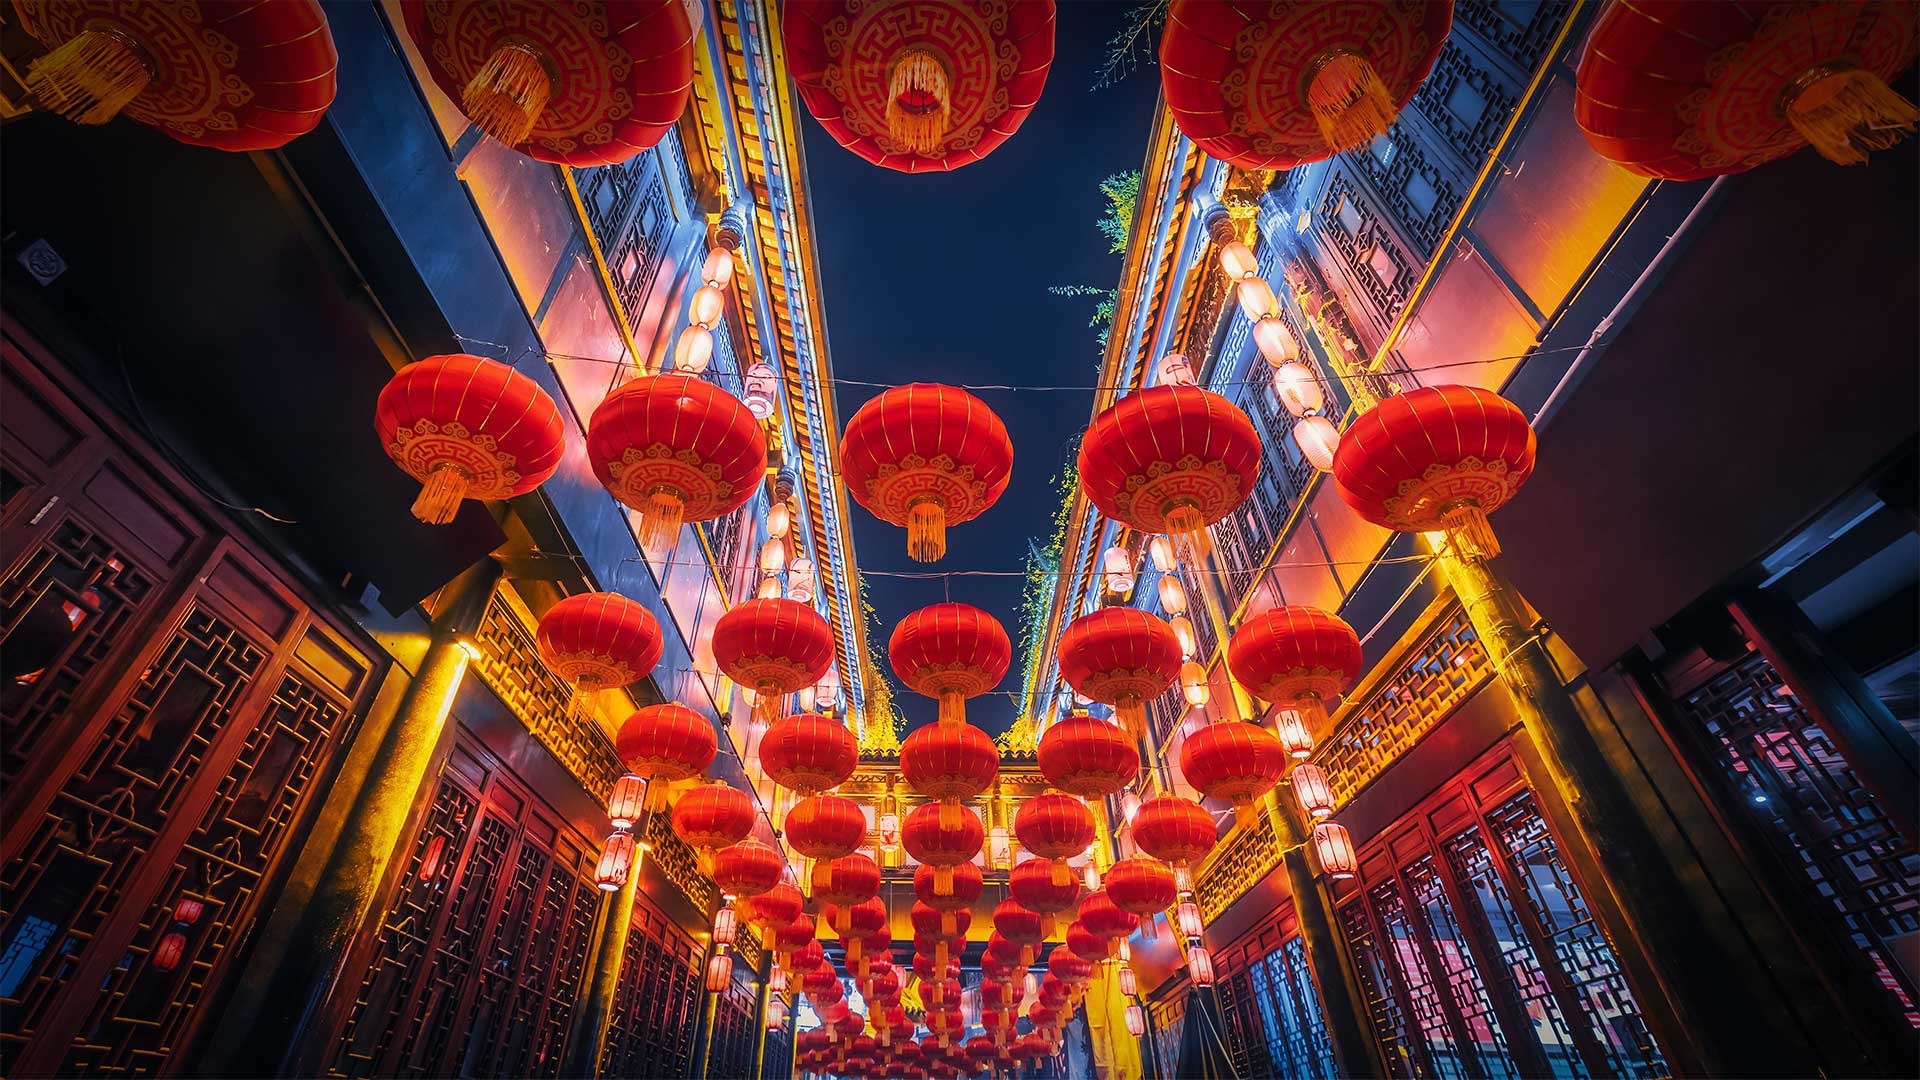 Red lanterns hanging in Jinli Street, Chengdu, China - Philippe LEJEANVRE/Getty Images)